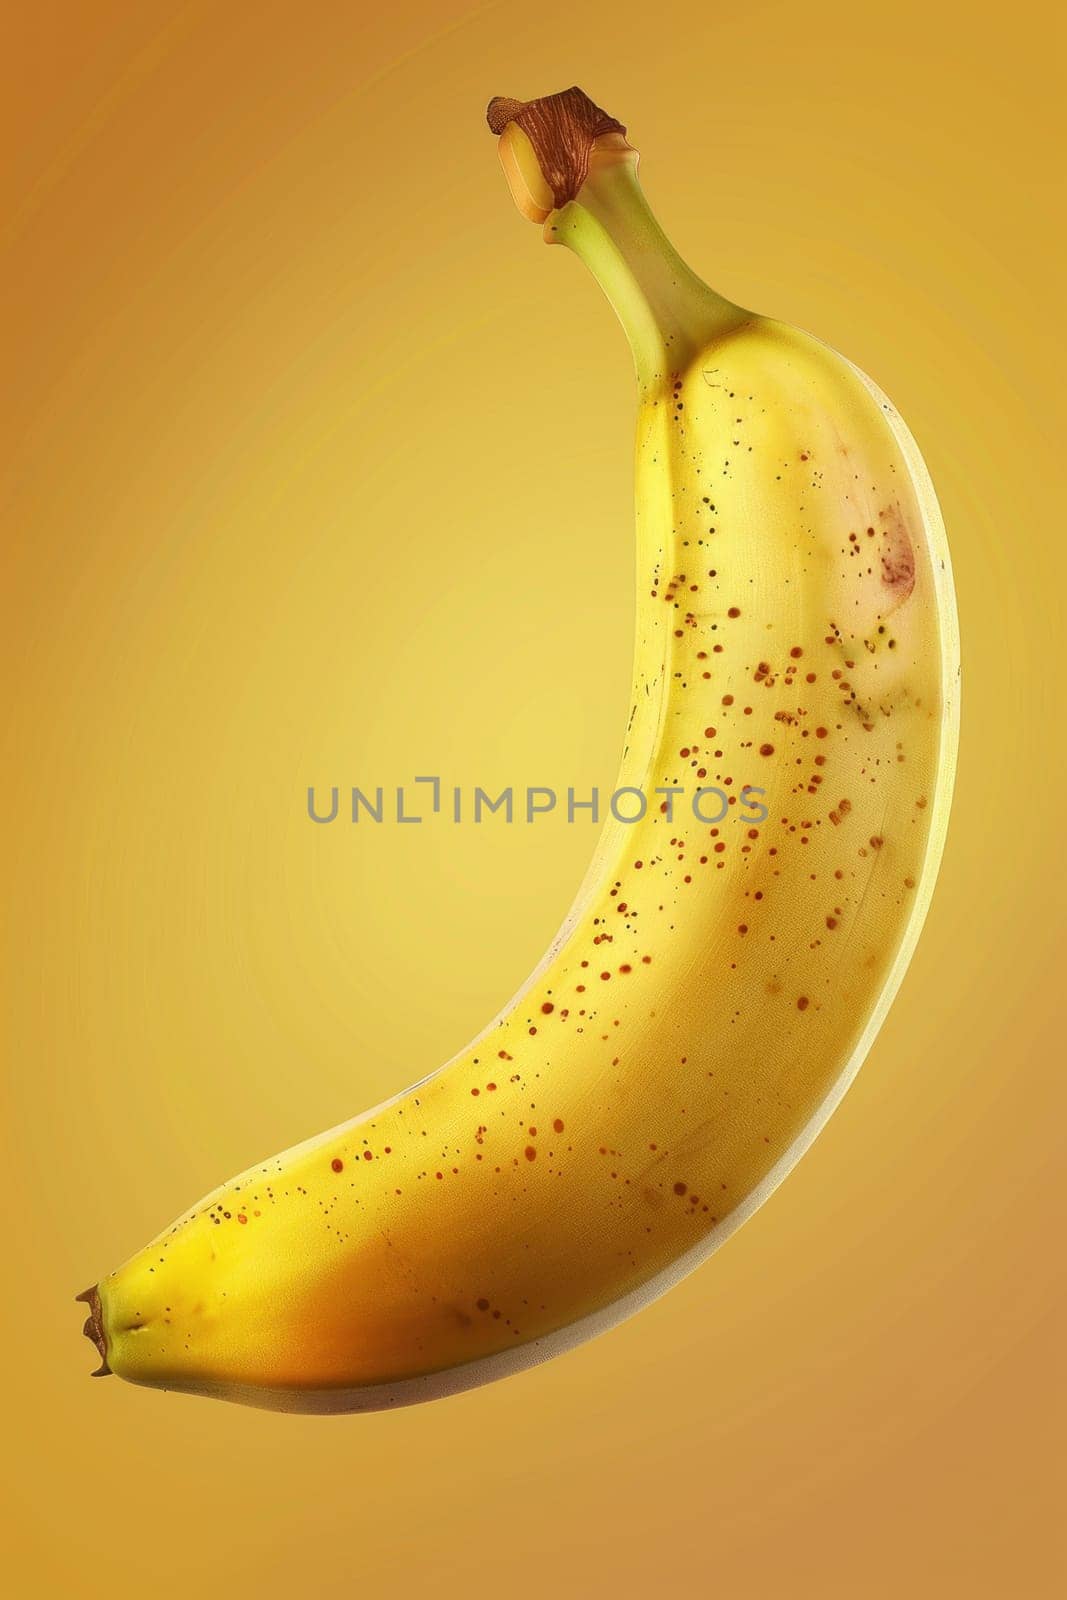 A banana with brown spots on it. The banana is yellow and has a stem